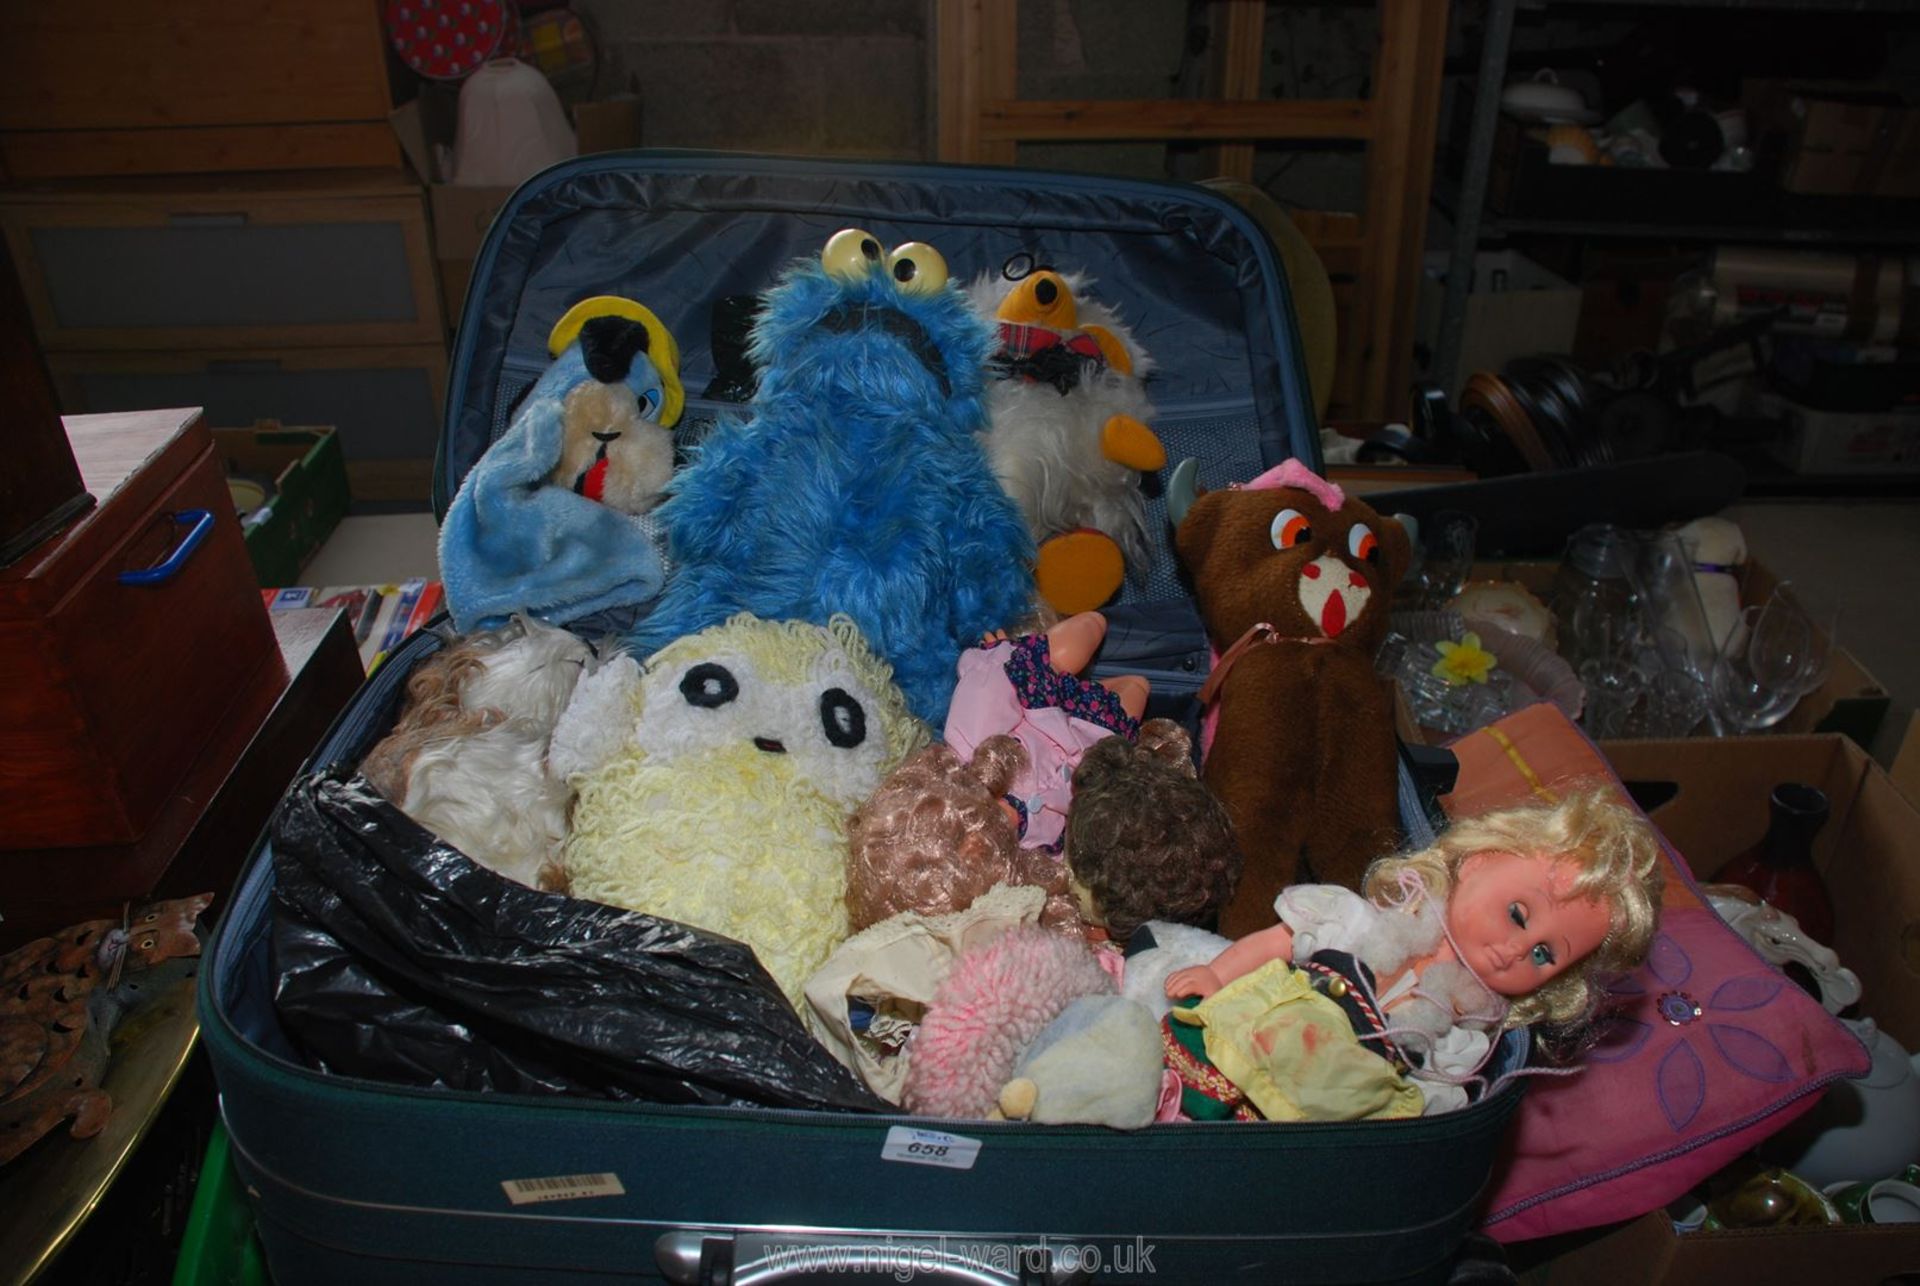 A case full of soft toys including hand puppet,